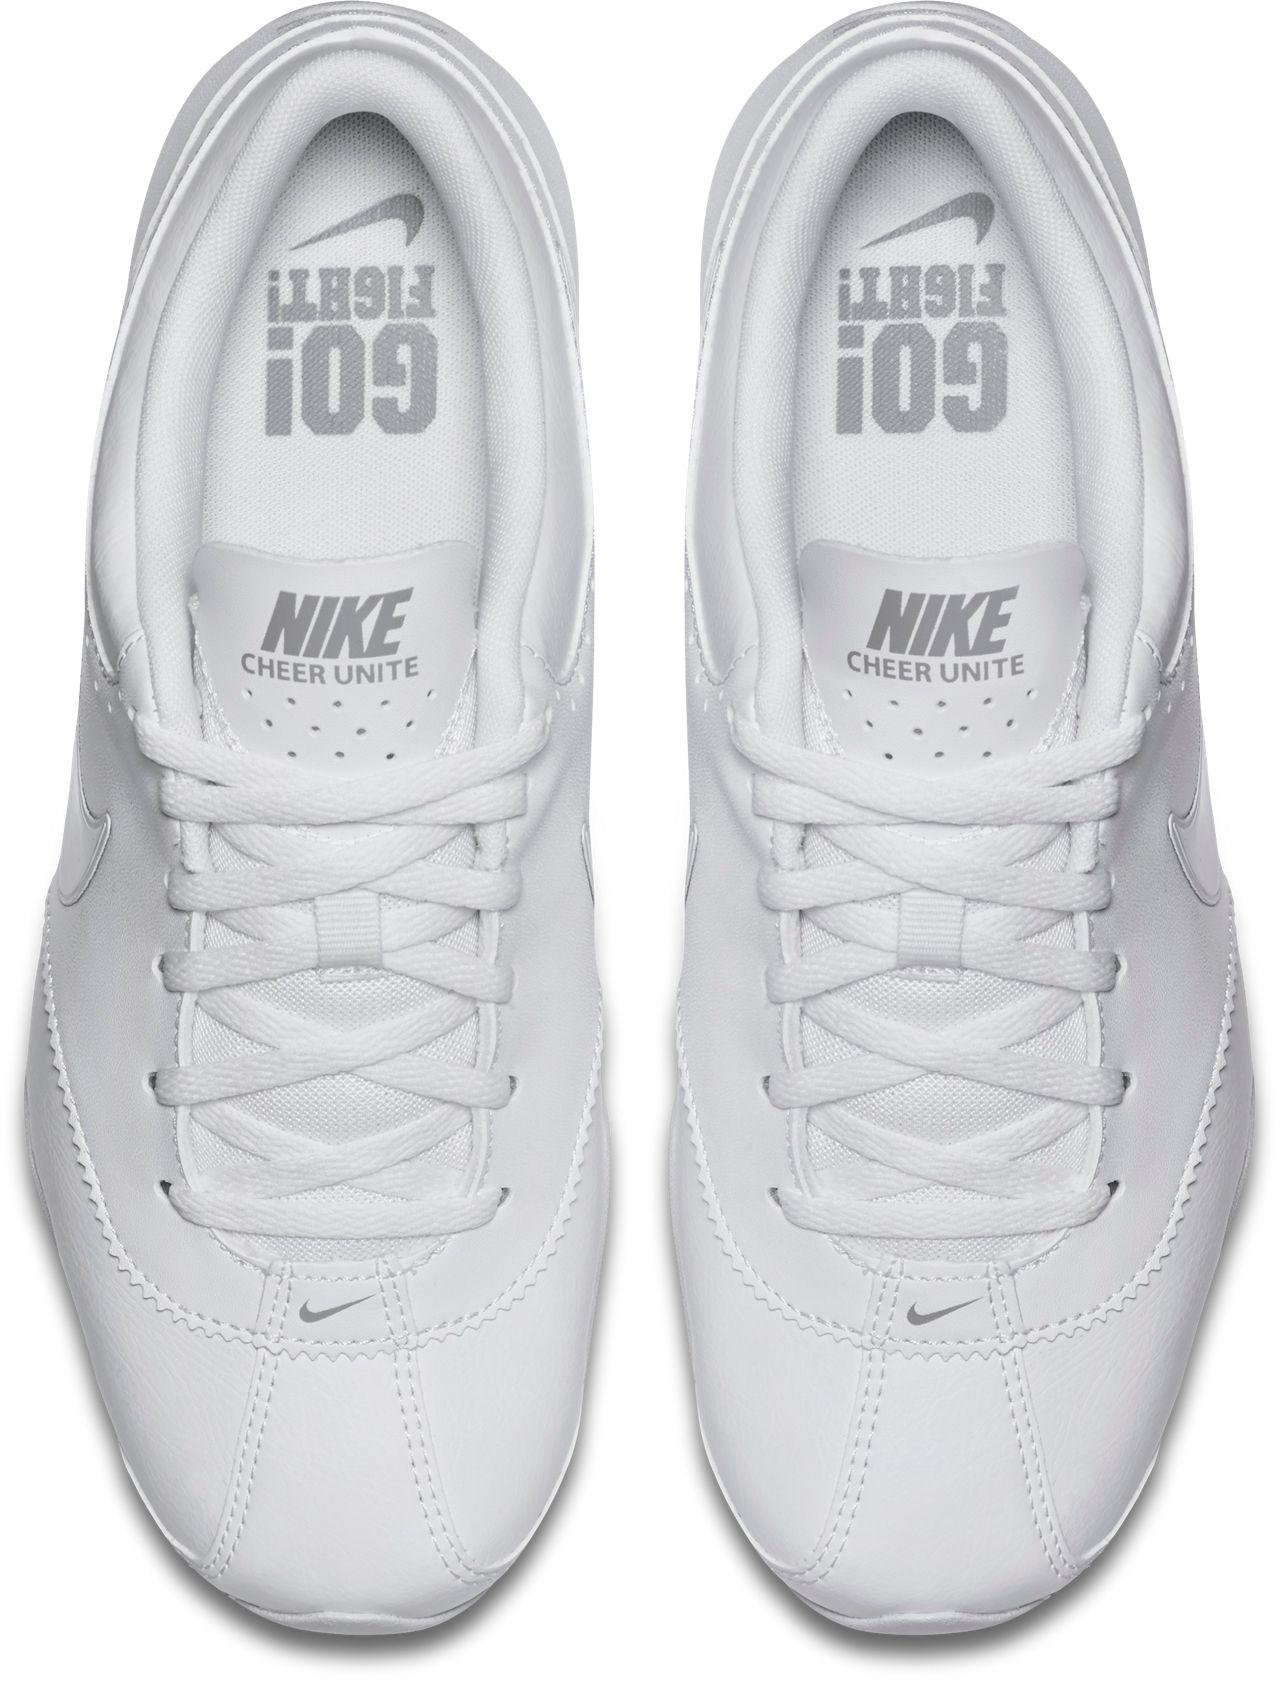 Nike Synthetic Cheer Unite Cheerleading Shoes In White Lyst